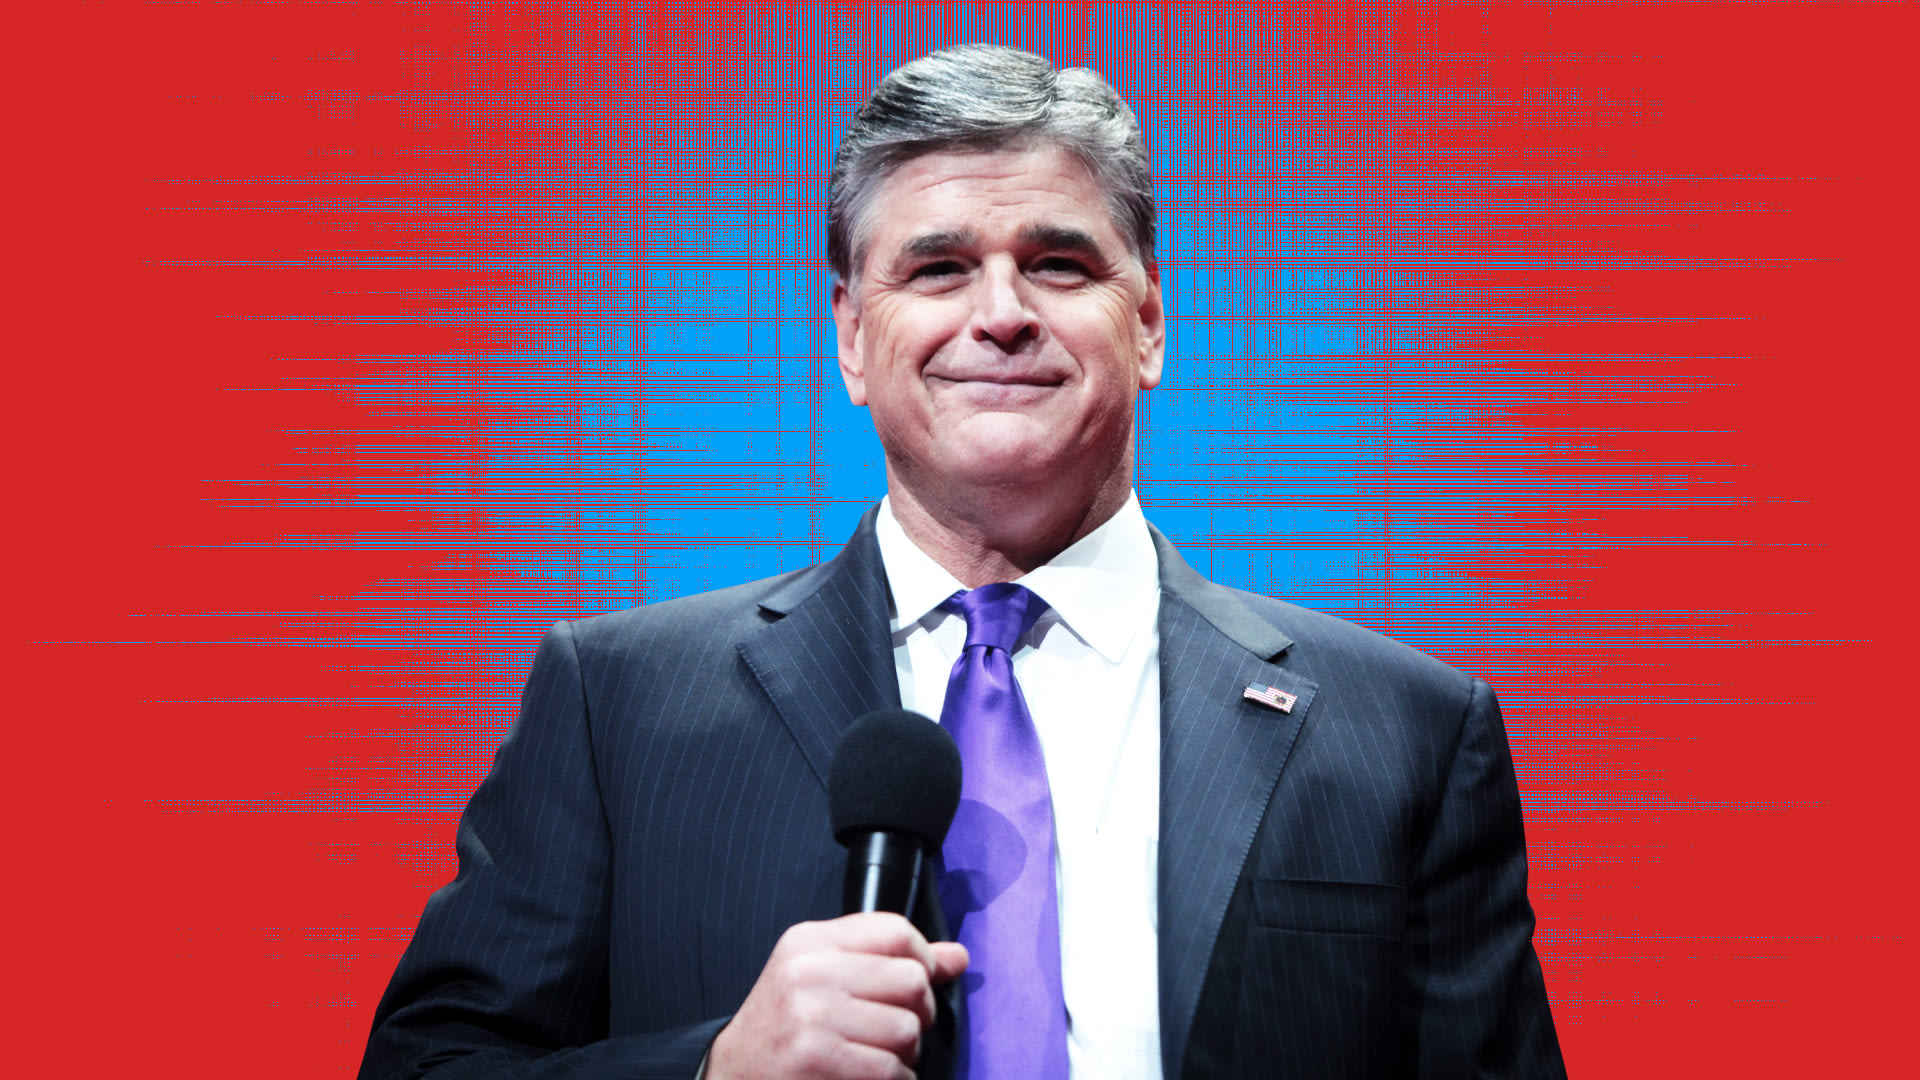 Exposure to Sean Hannity may be lethal, studies on COVID-19 suggest